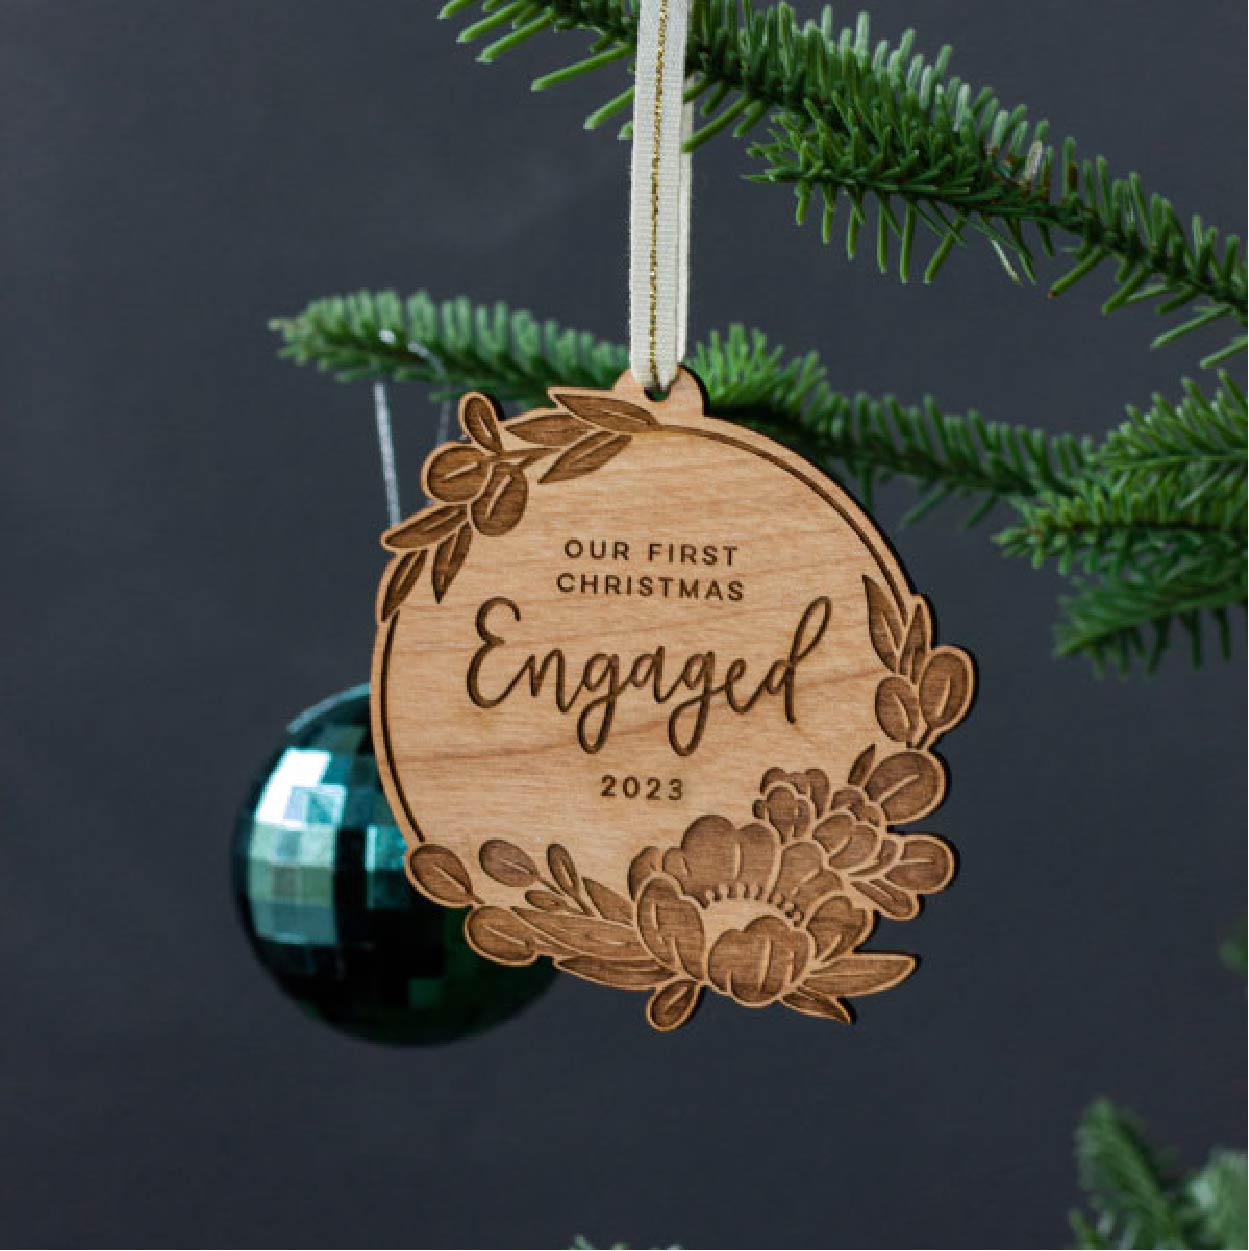 Our First Christmas Engaged 2023 Ornament